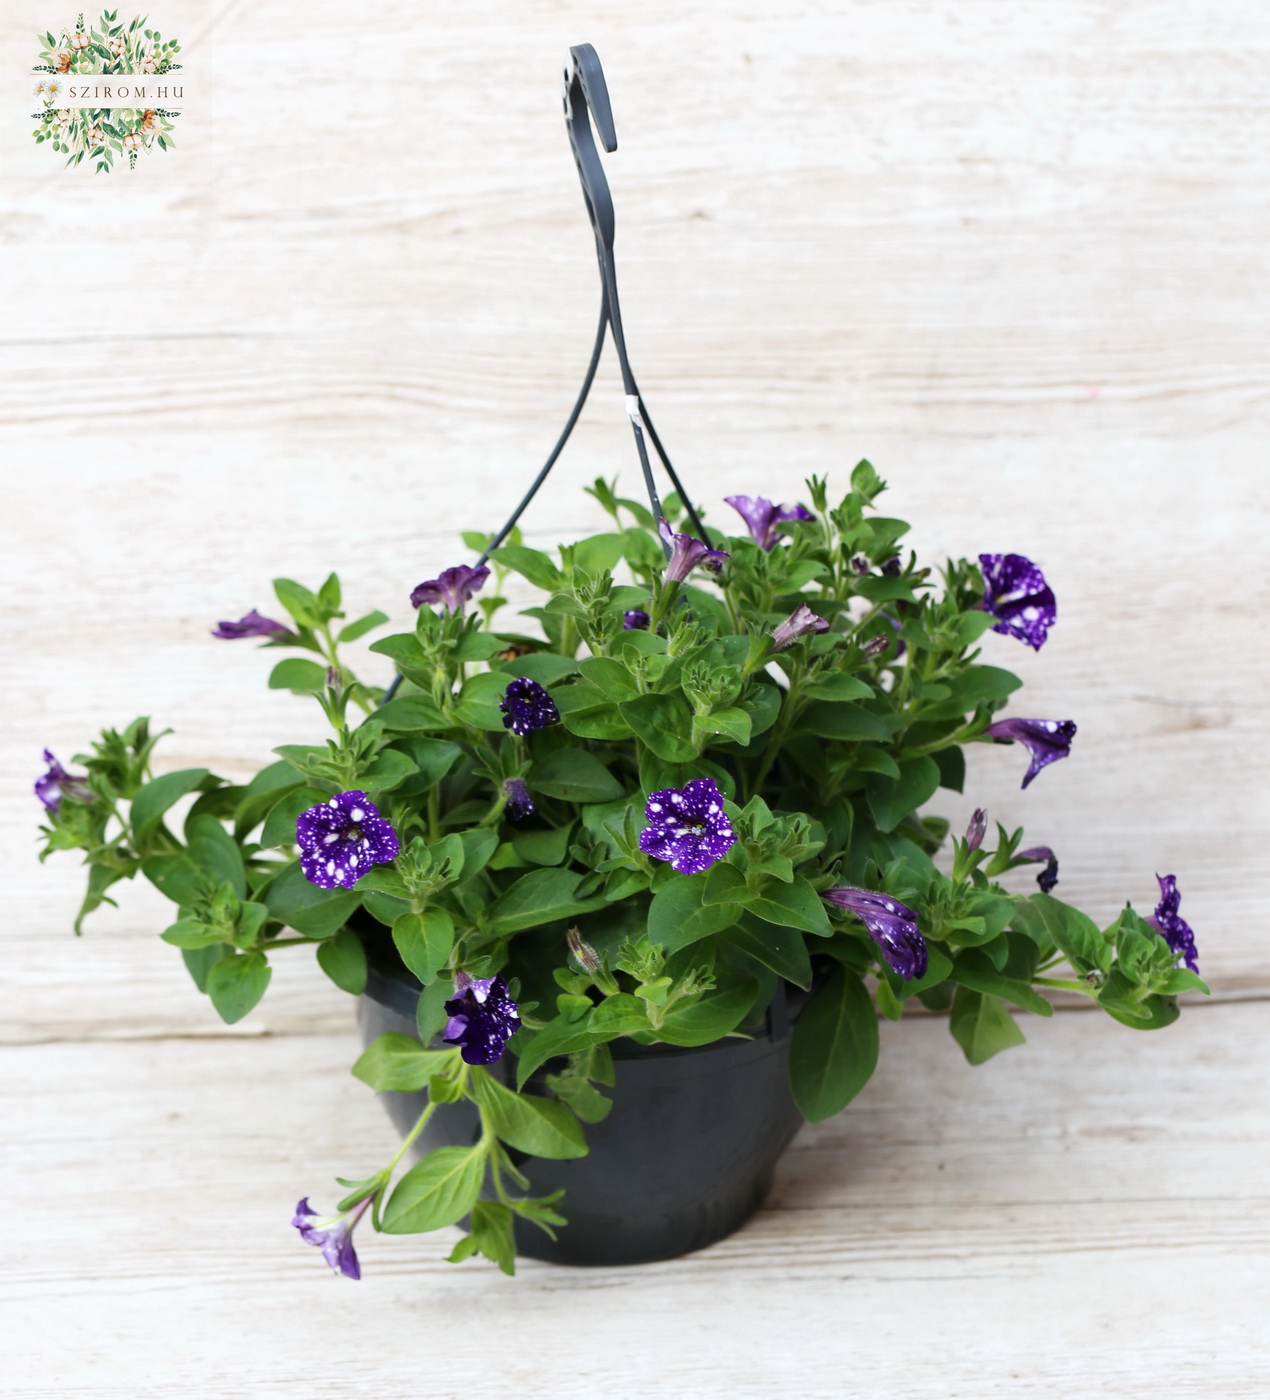 flower delivery Budapest - Hanging petunia (outdoor balcony plant)